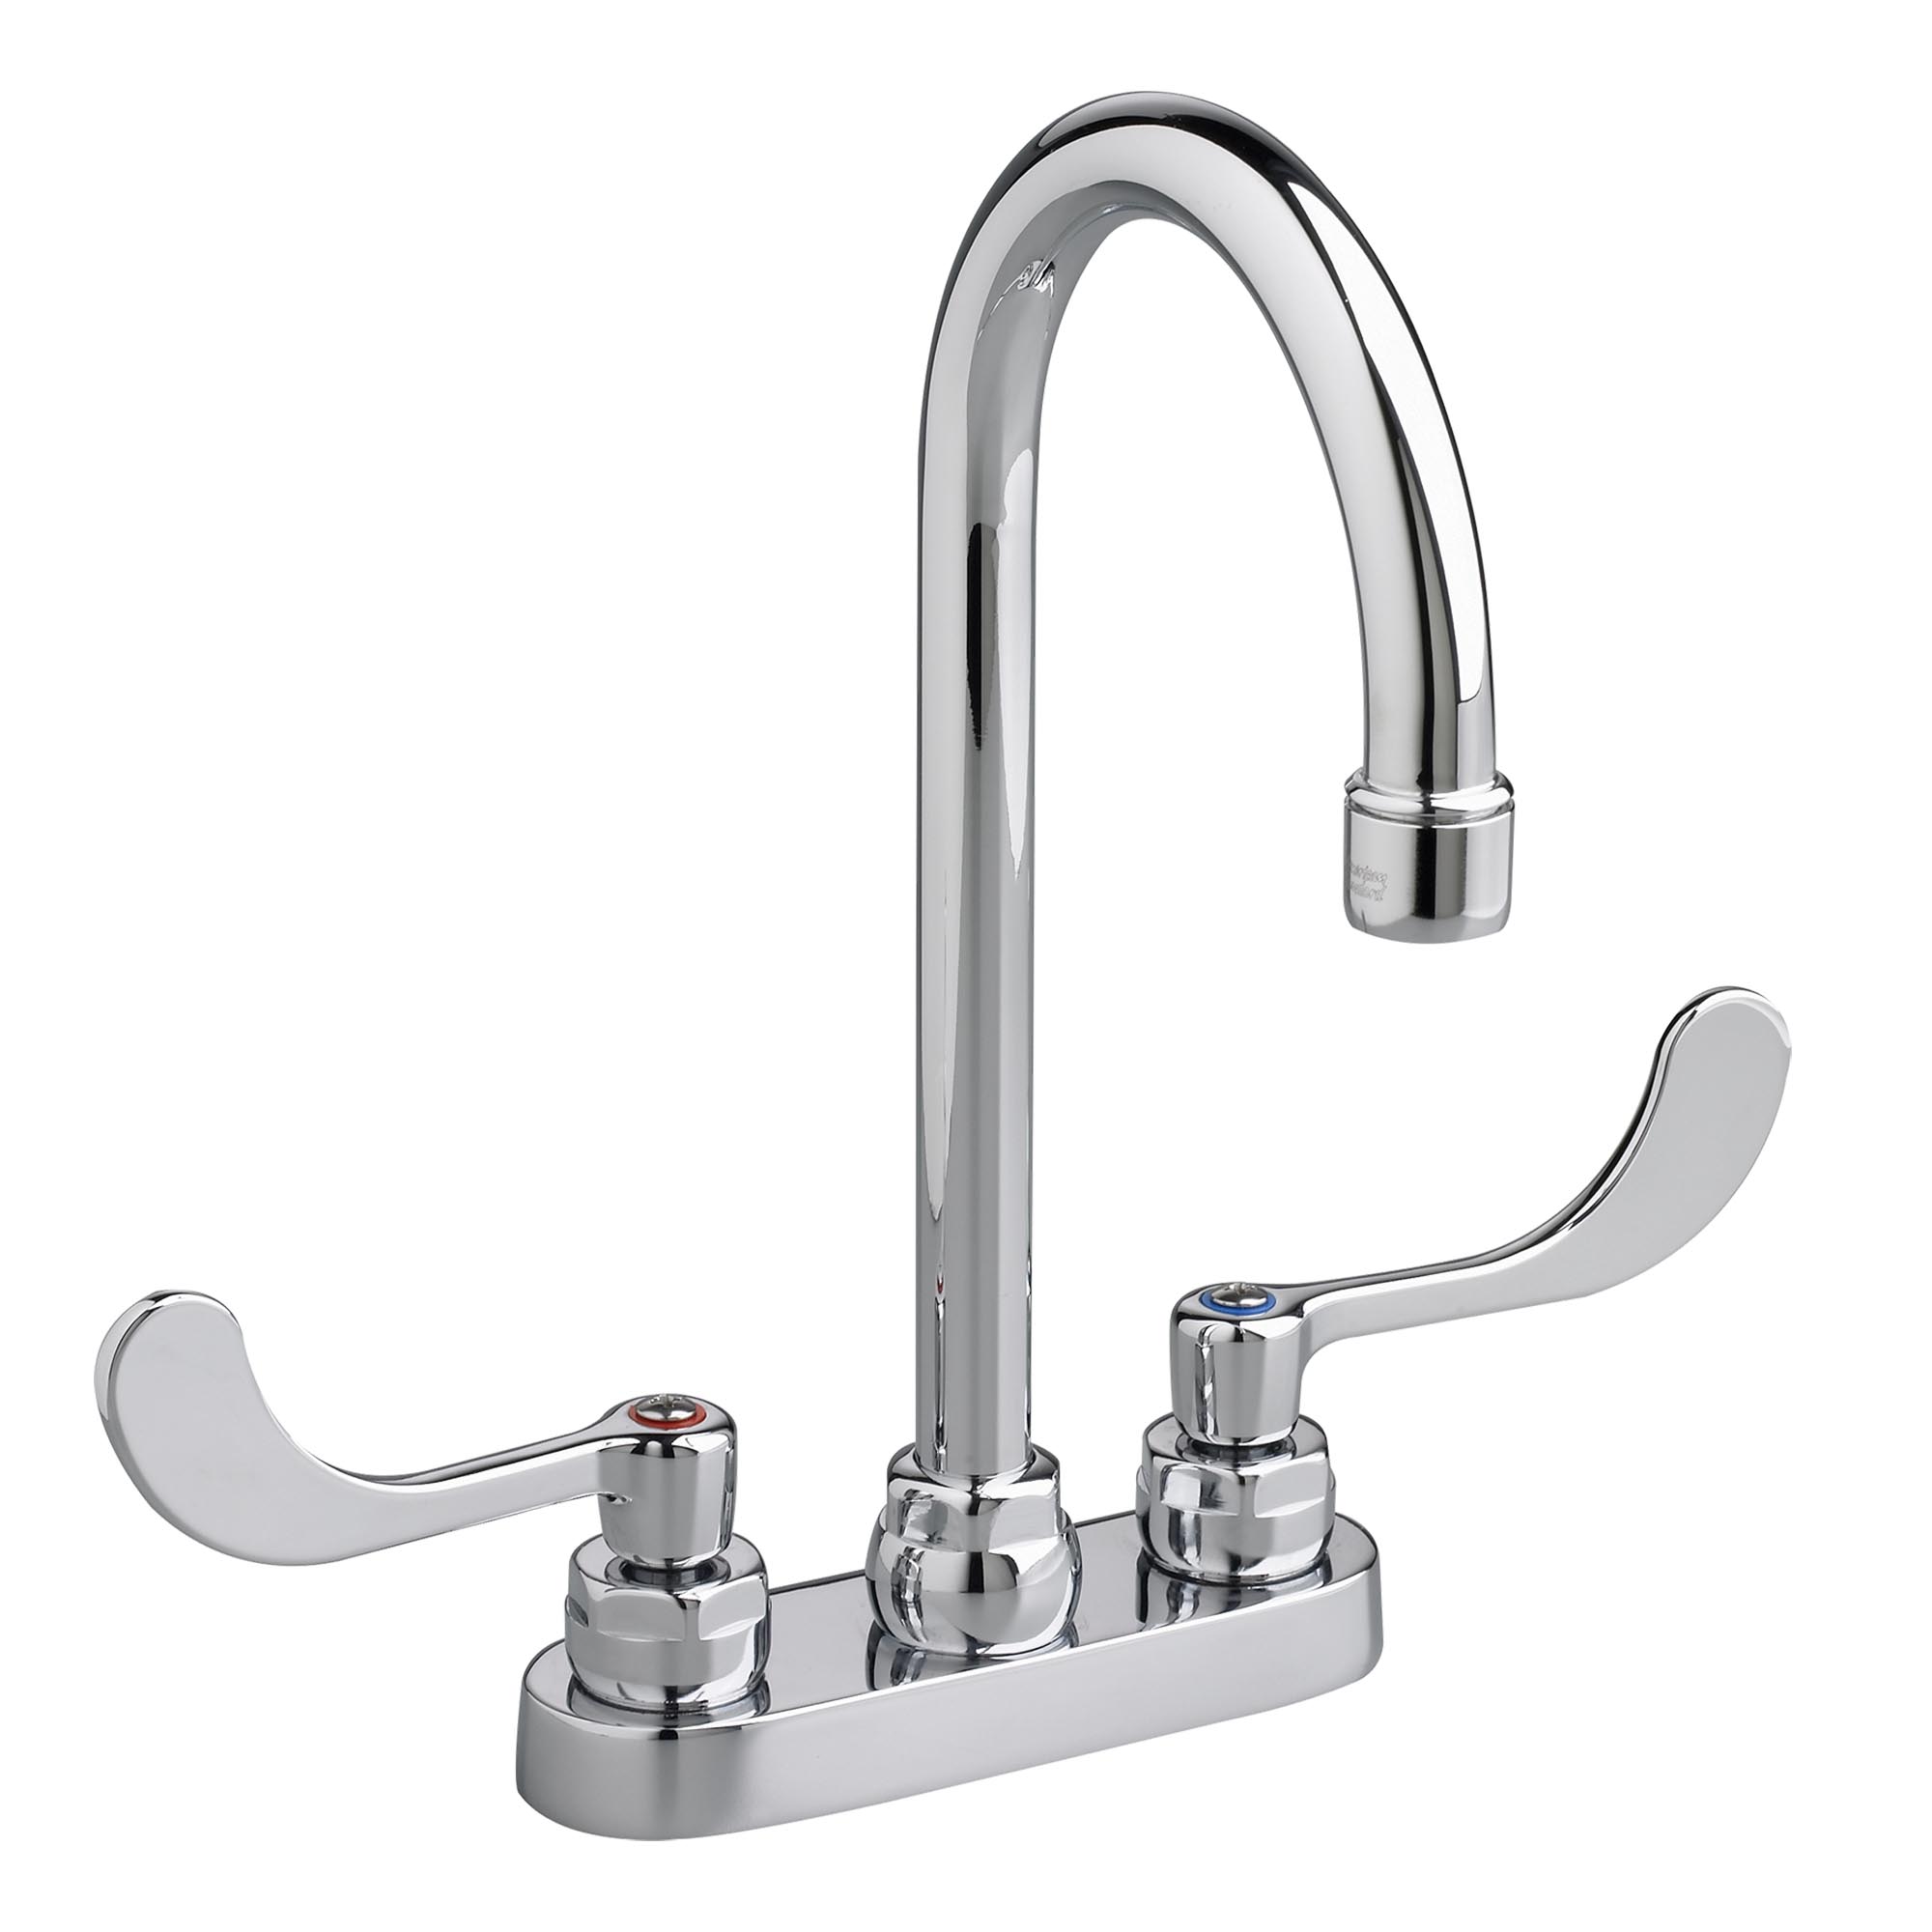 American Standard 7502.170-002 Monterrey® Centerset Lavatory Faucet, Polished Chrome, 2 Handles, Grid Strainer Drain, 1.5 gpm Flow Rate